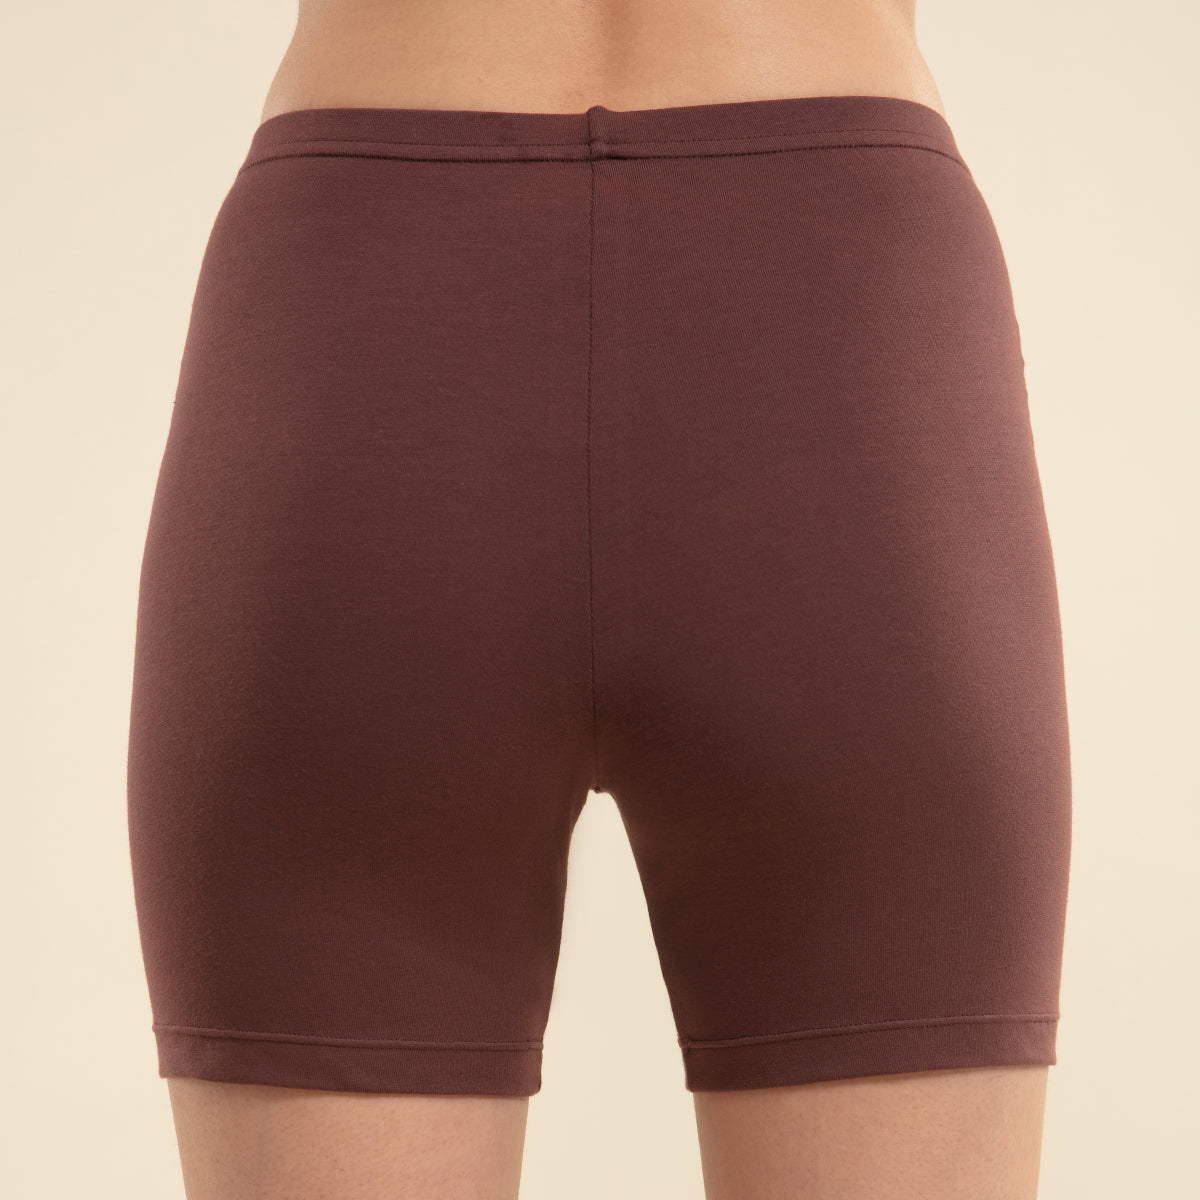 Nykd by Nykaa Pack of 2 Stretch Cotton Cycling Shorts-NYP083 Skin & Brown